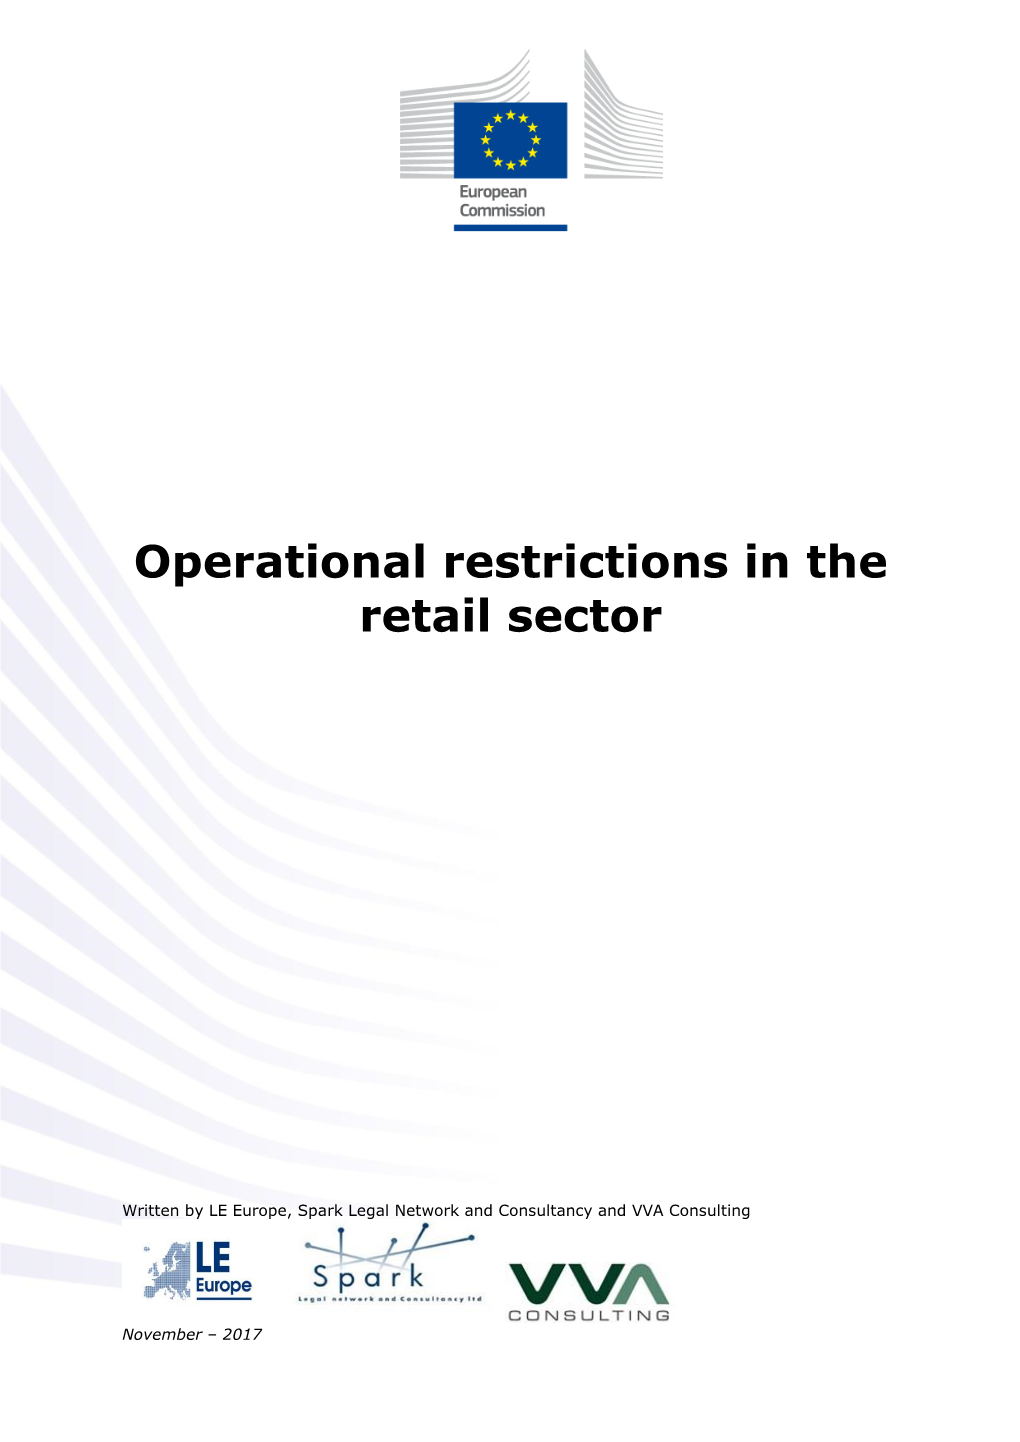 Operational Restrictions in the Retail Sector